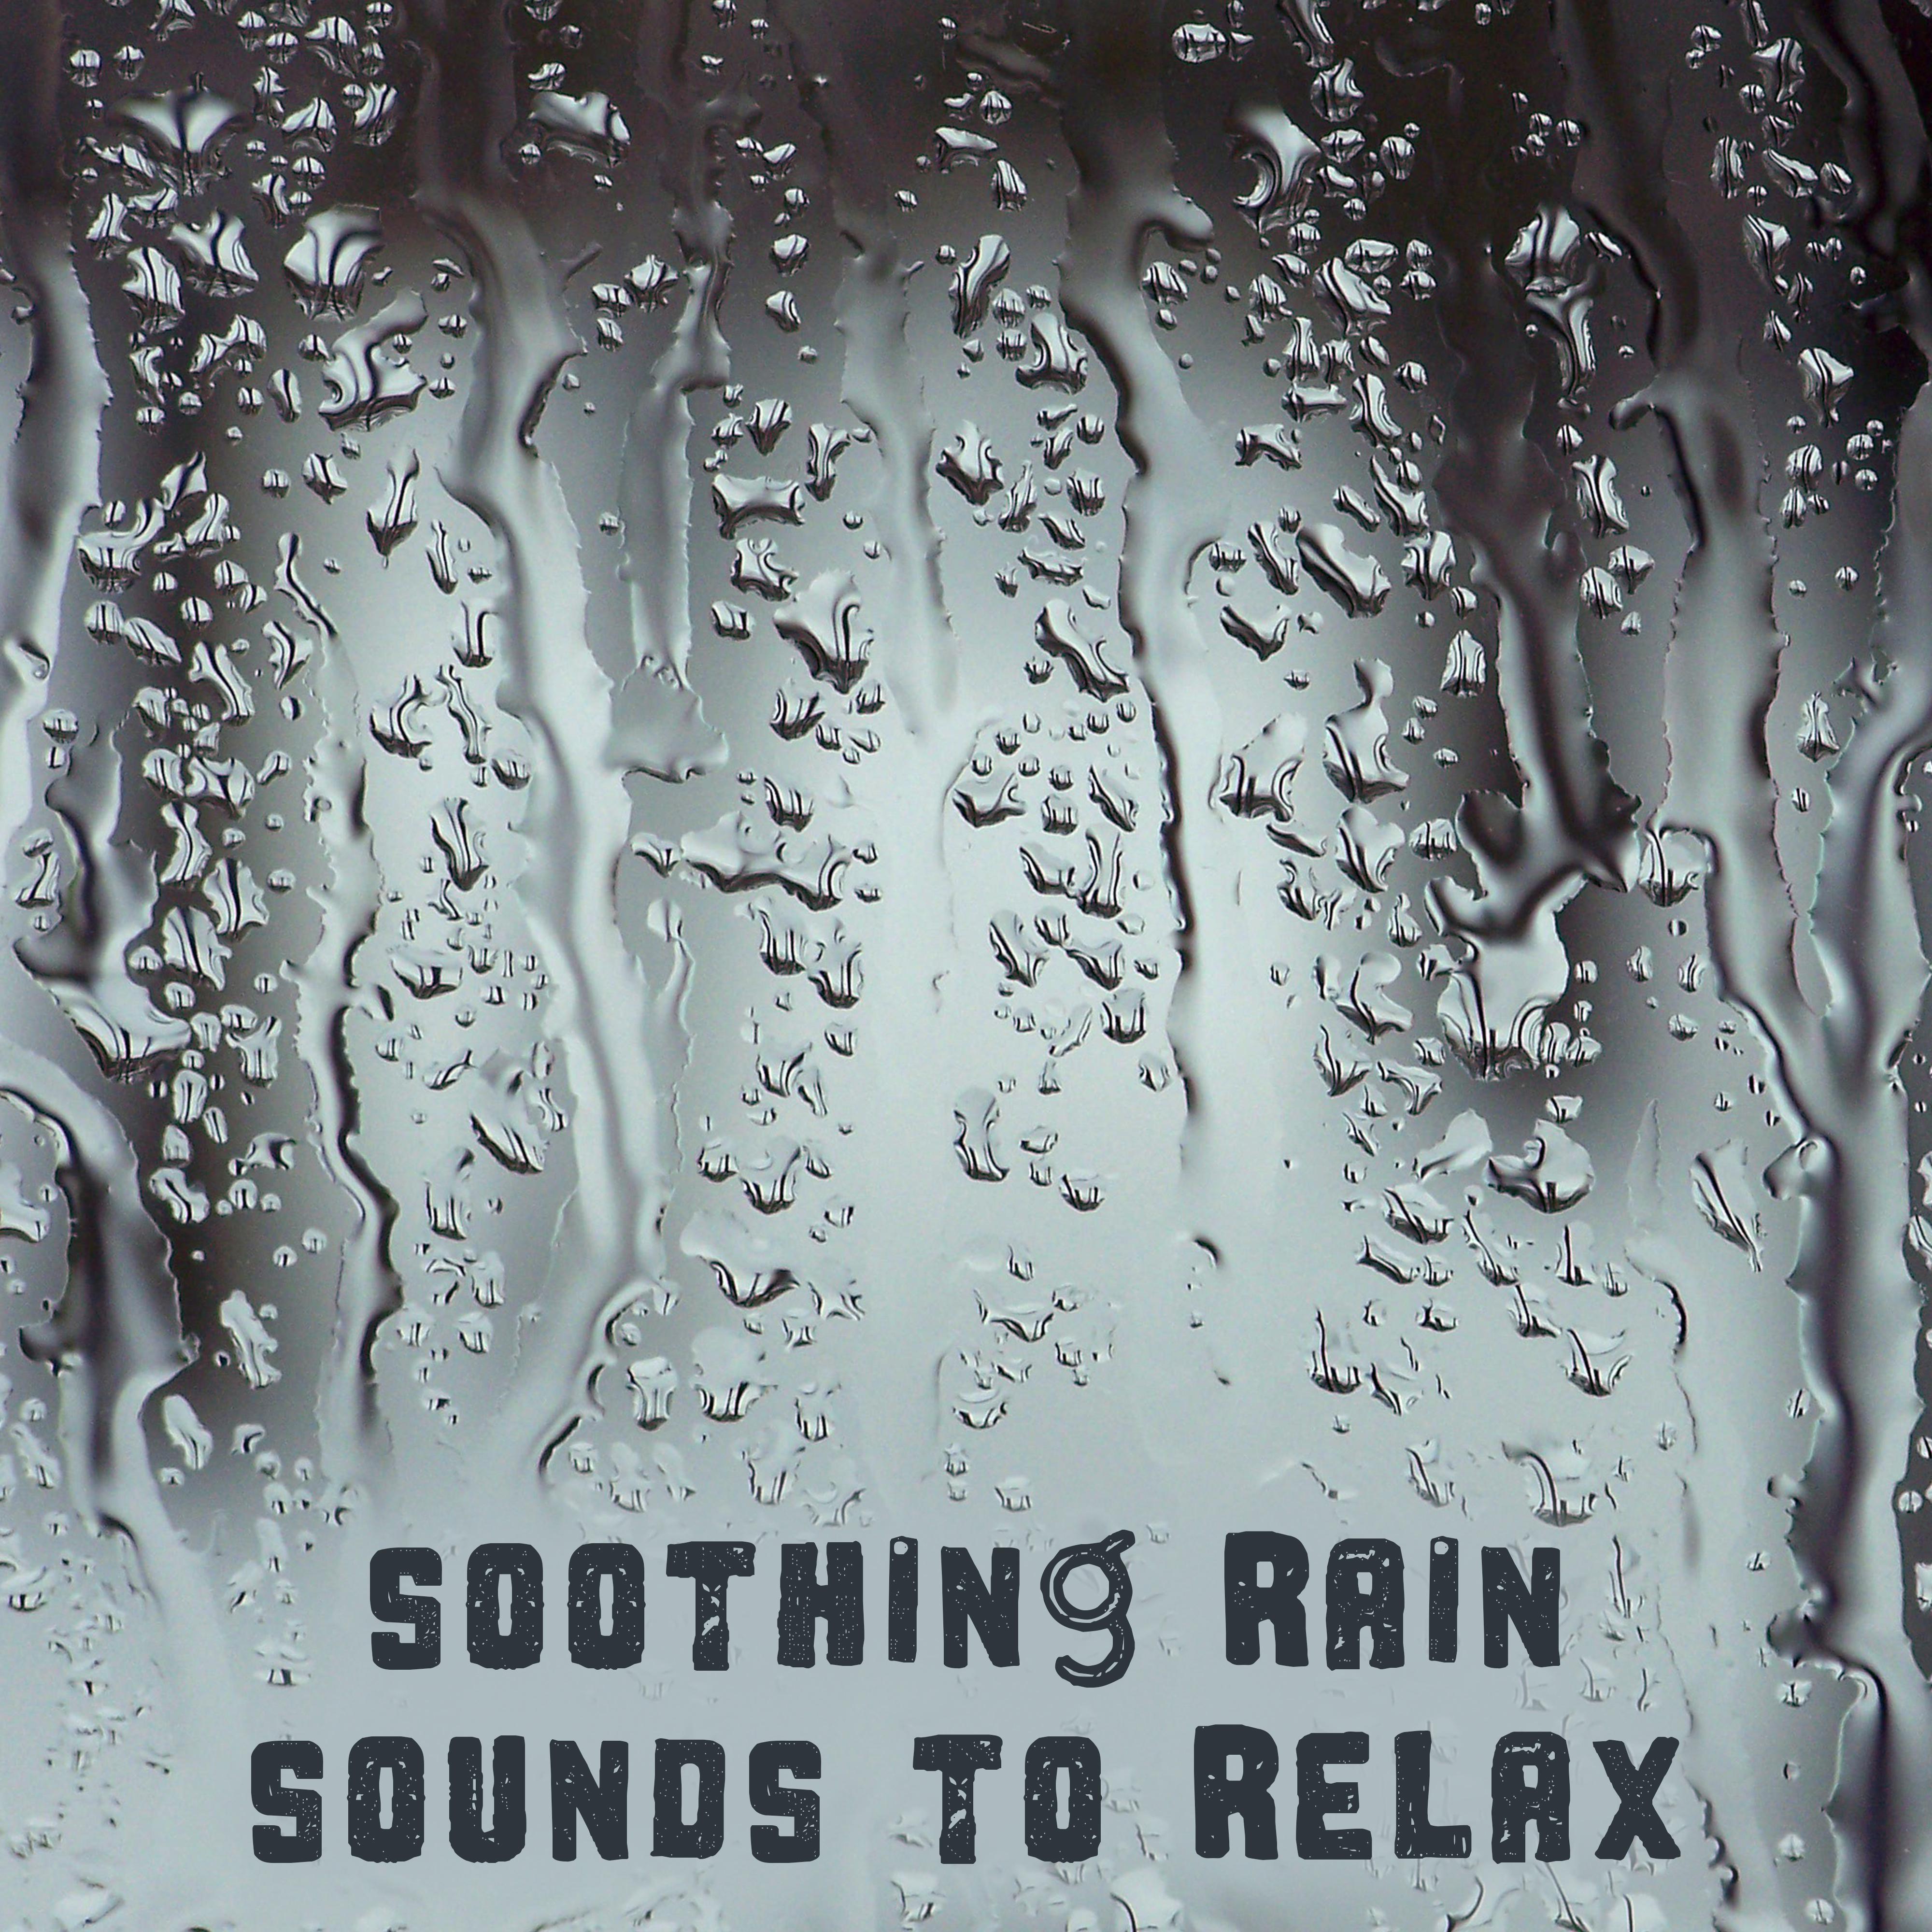 Soothing Rain Sounds to Relax – Calming New Age Music, Soft & Relaxing Sounds, Rest with Beautiful Music